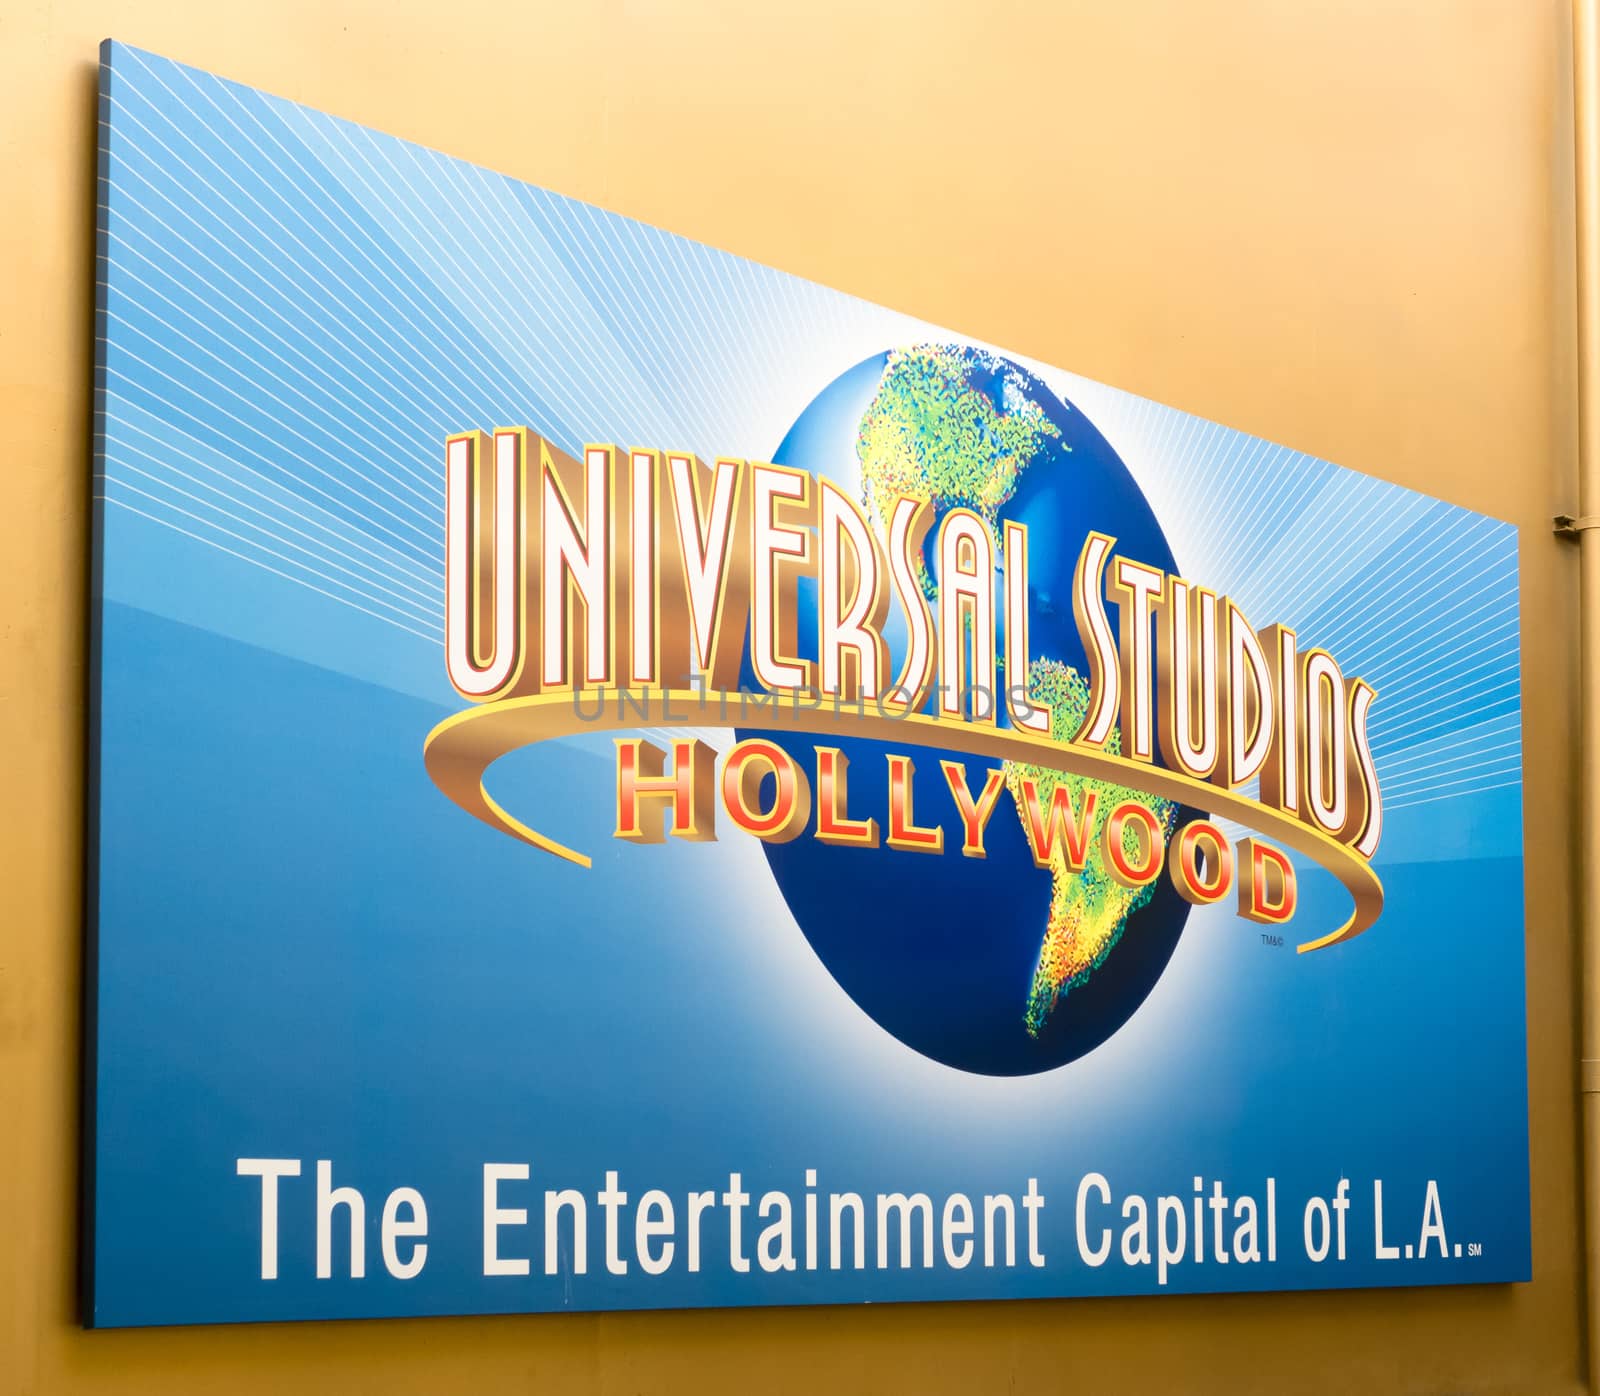 UNIVERSAL CITY, CA/USA DECEMBER 22, 2015: Universal Studios of Hollywood sign and logo.